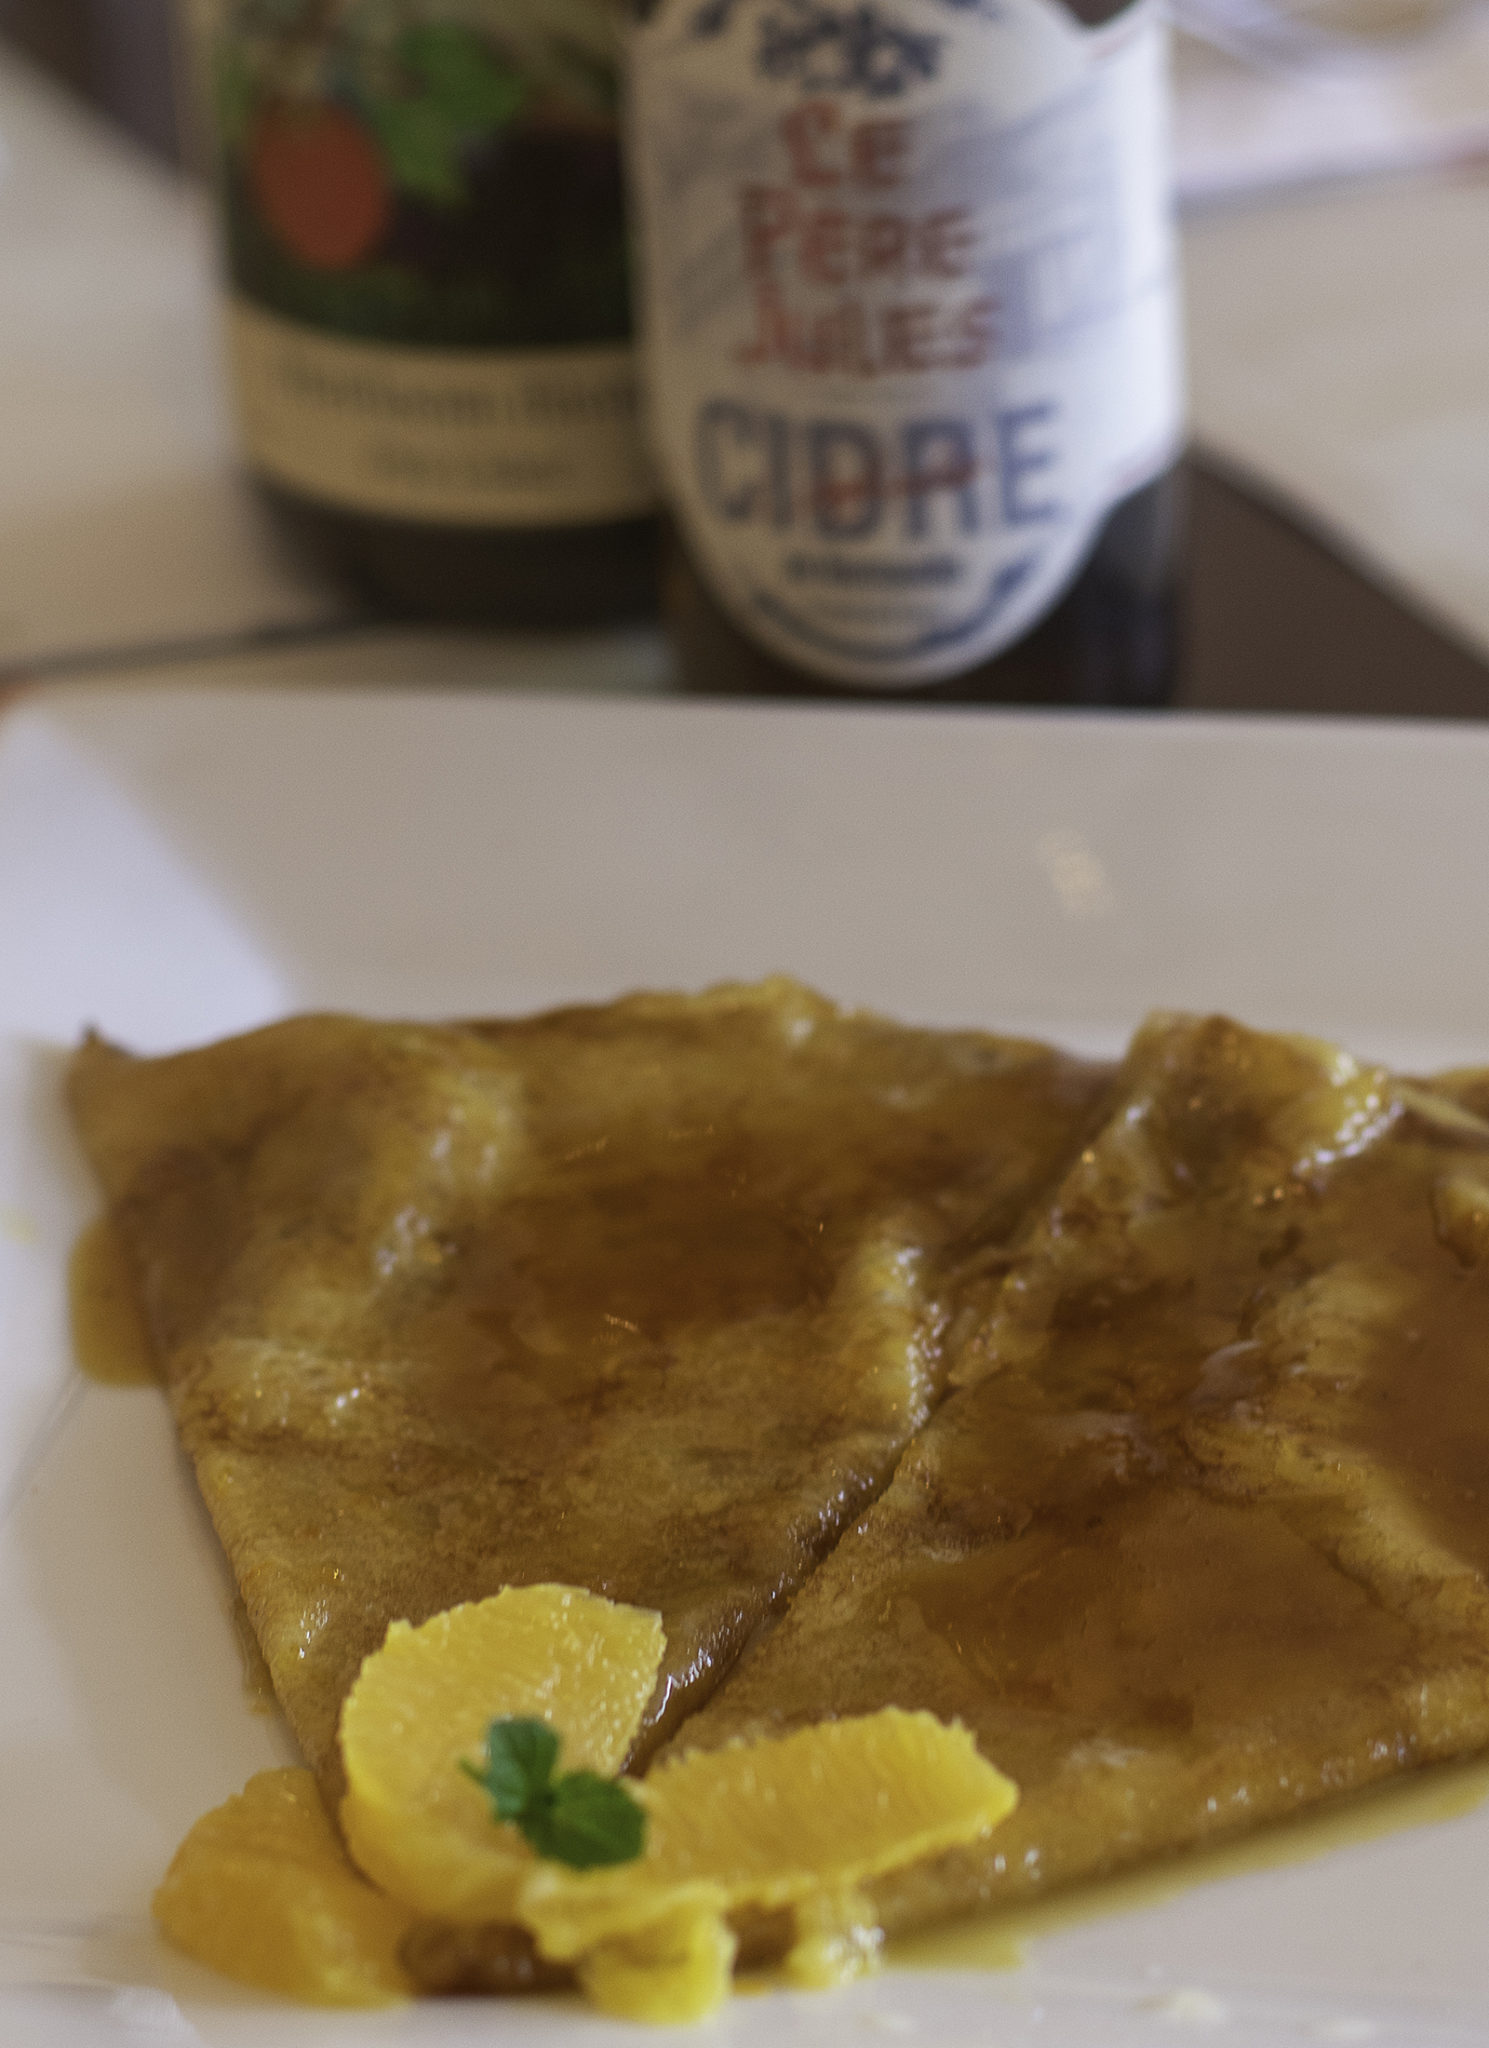 Crepes Suzette with Orange zest butter, caramel, orange juice and flambe Grand Marnier at Creperie Chez Solange in Larkfield. Heather Irwin/PD